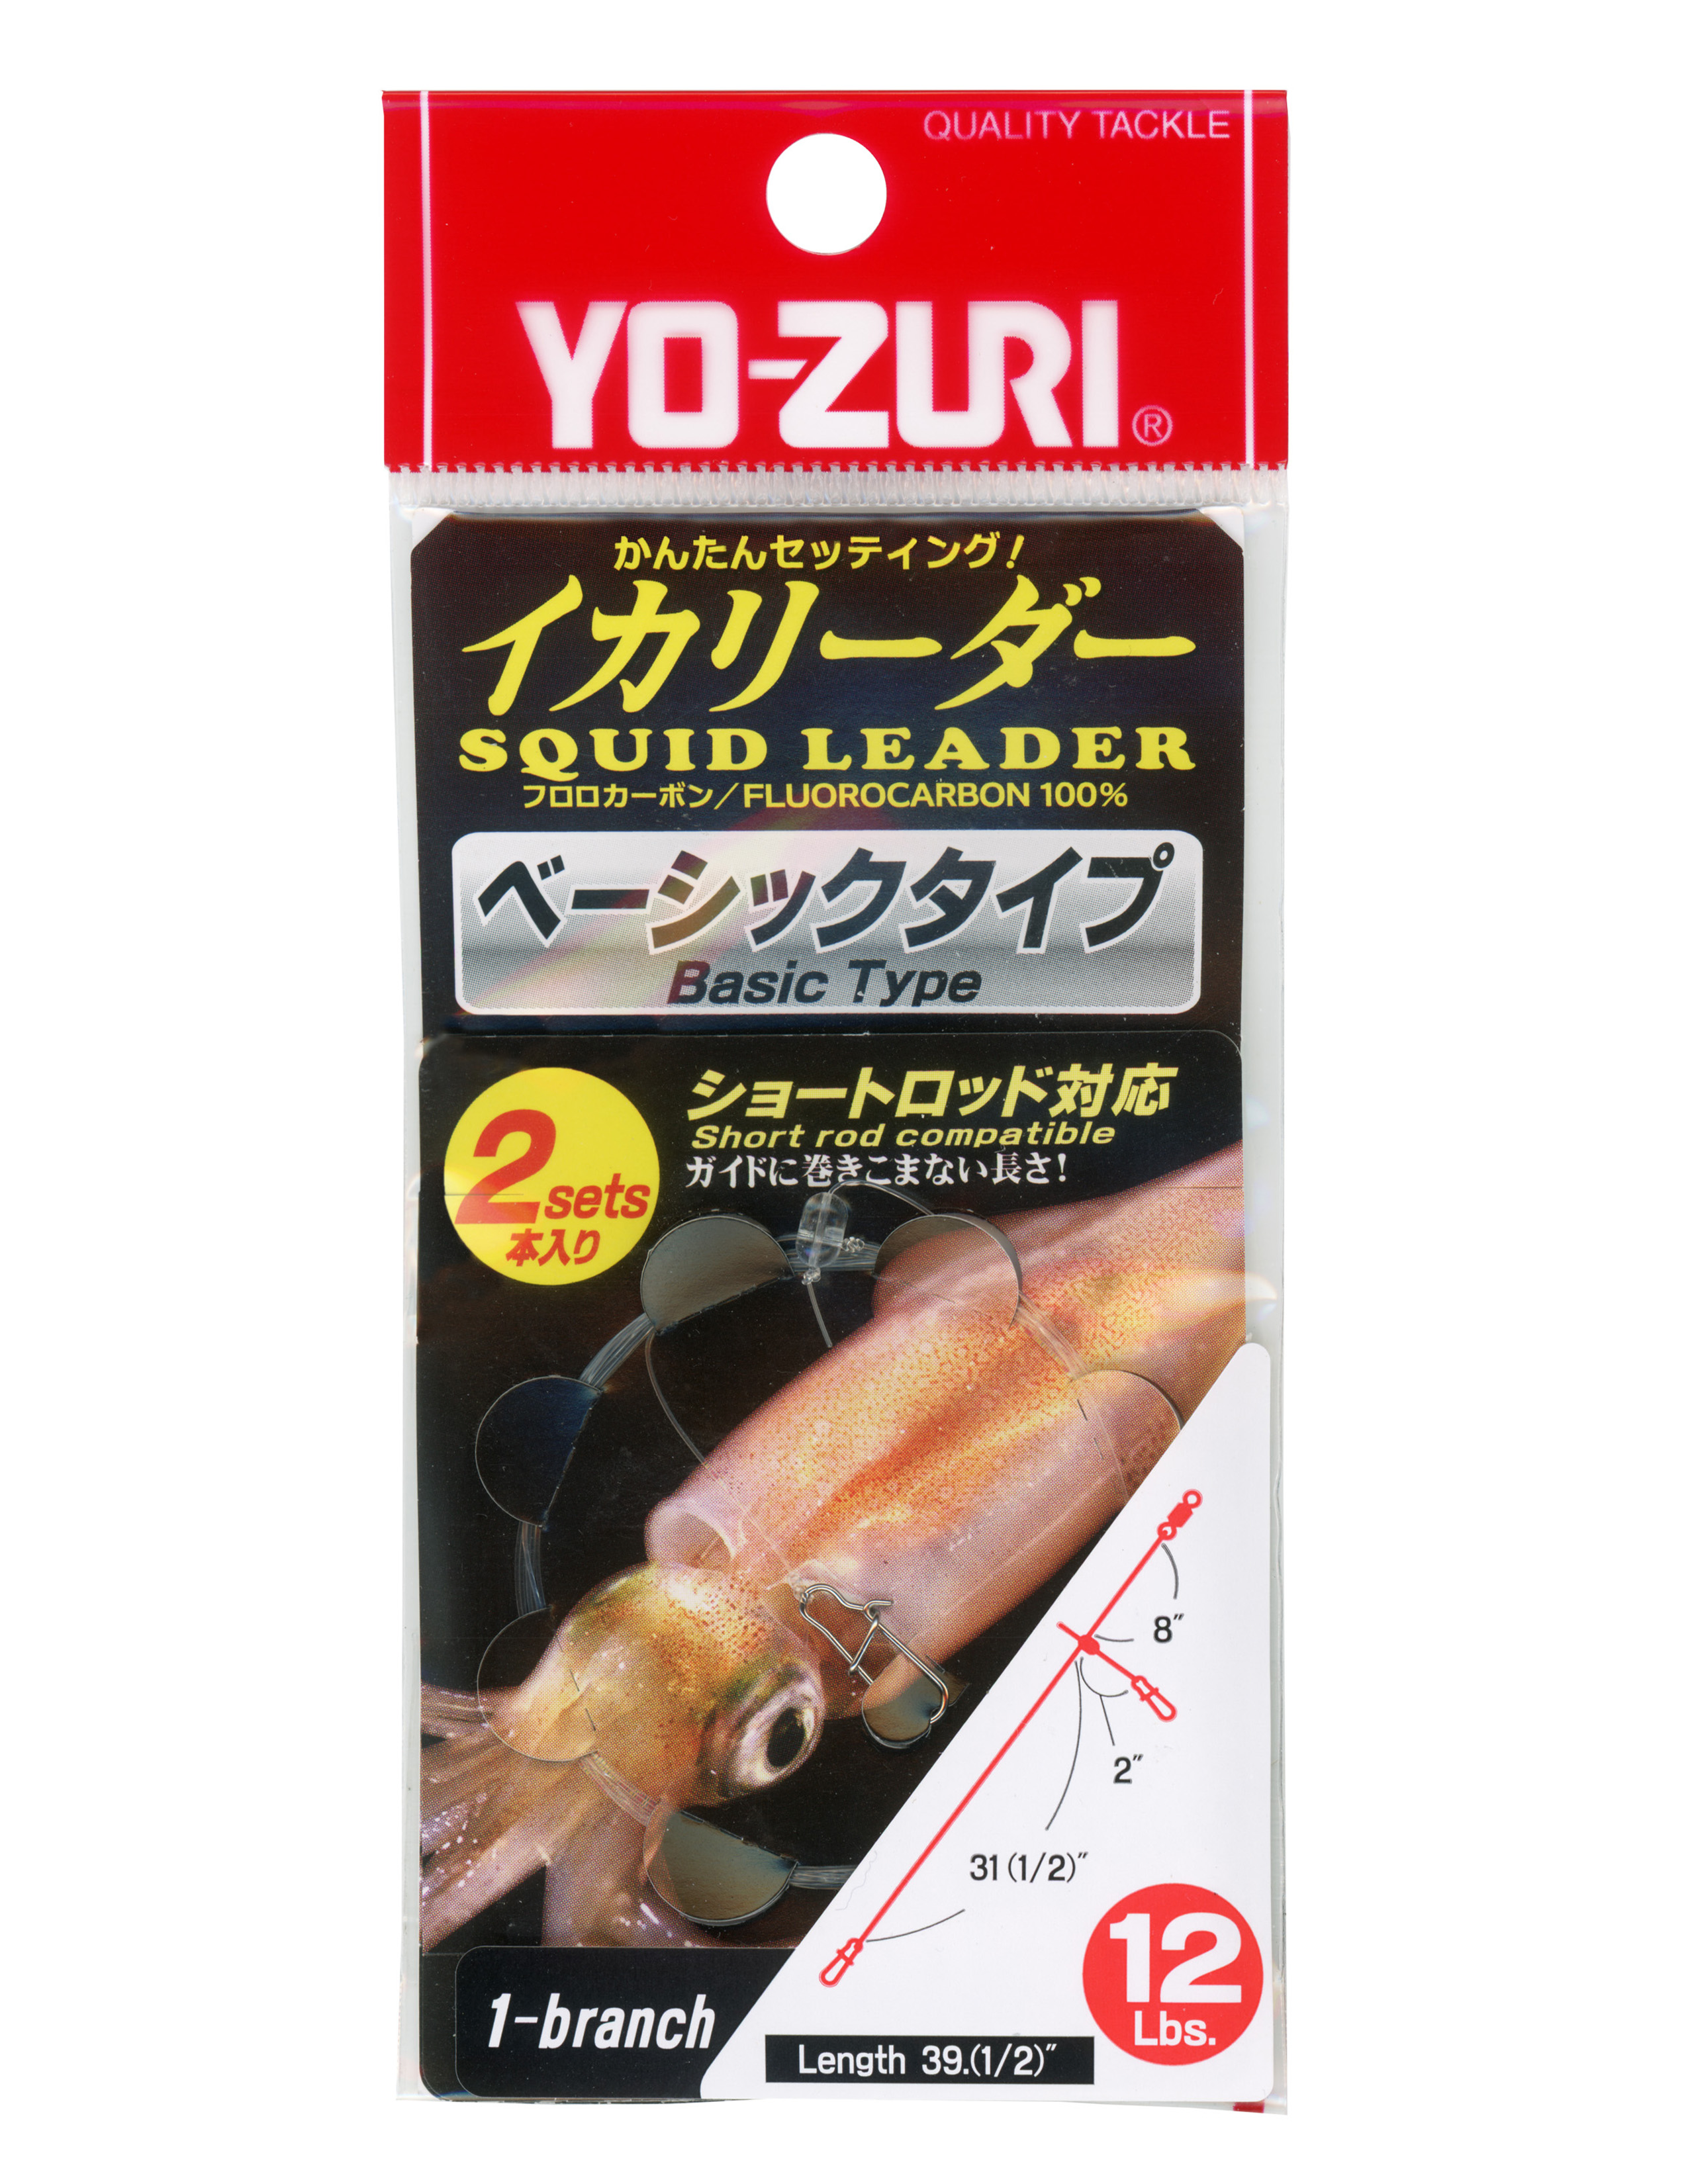 squid lure, squid lure Suppliers and Manufacturers at